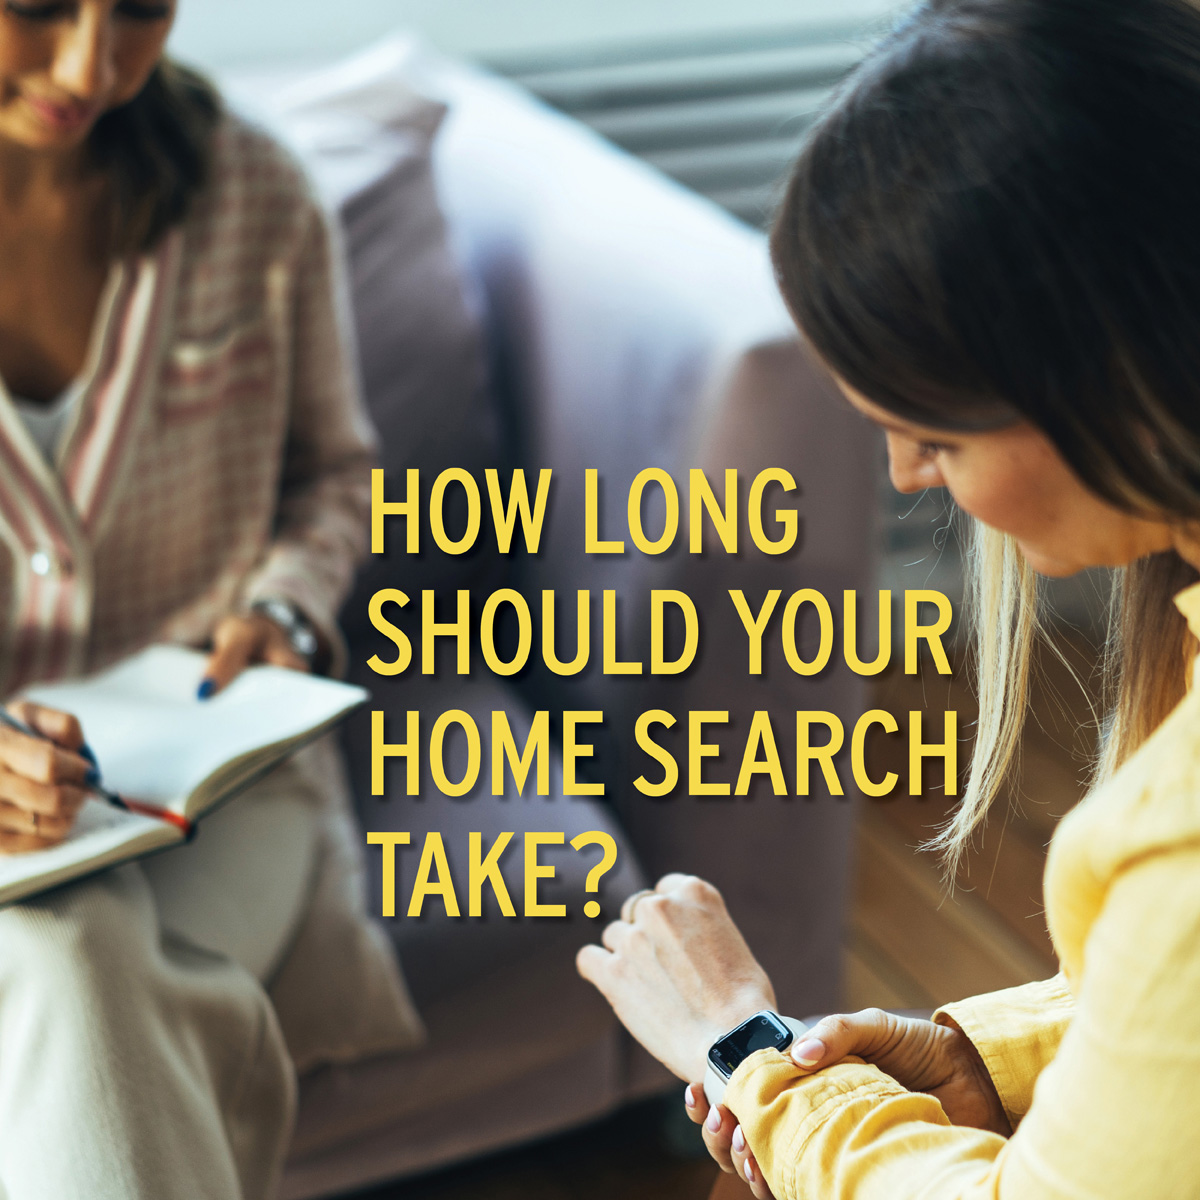 There's no easy answer for how long the average home search takes — so much depends on market conditions and time of year. Our best advice: Don't stress if your search is taking longer than expected! Call us today!
#newpurchase#homeloans#greatrates#fastclose#greatservice